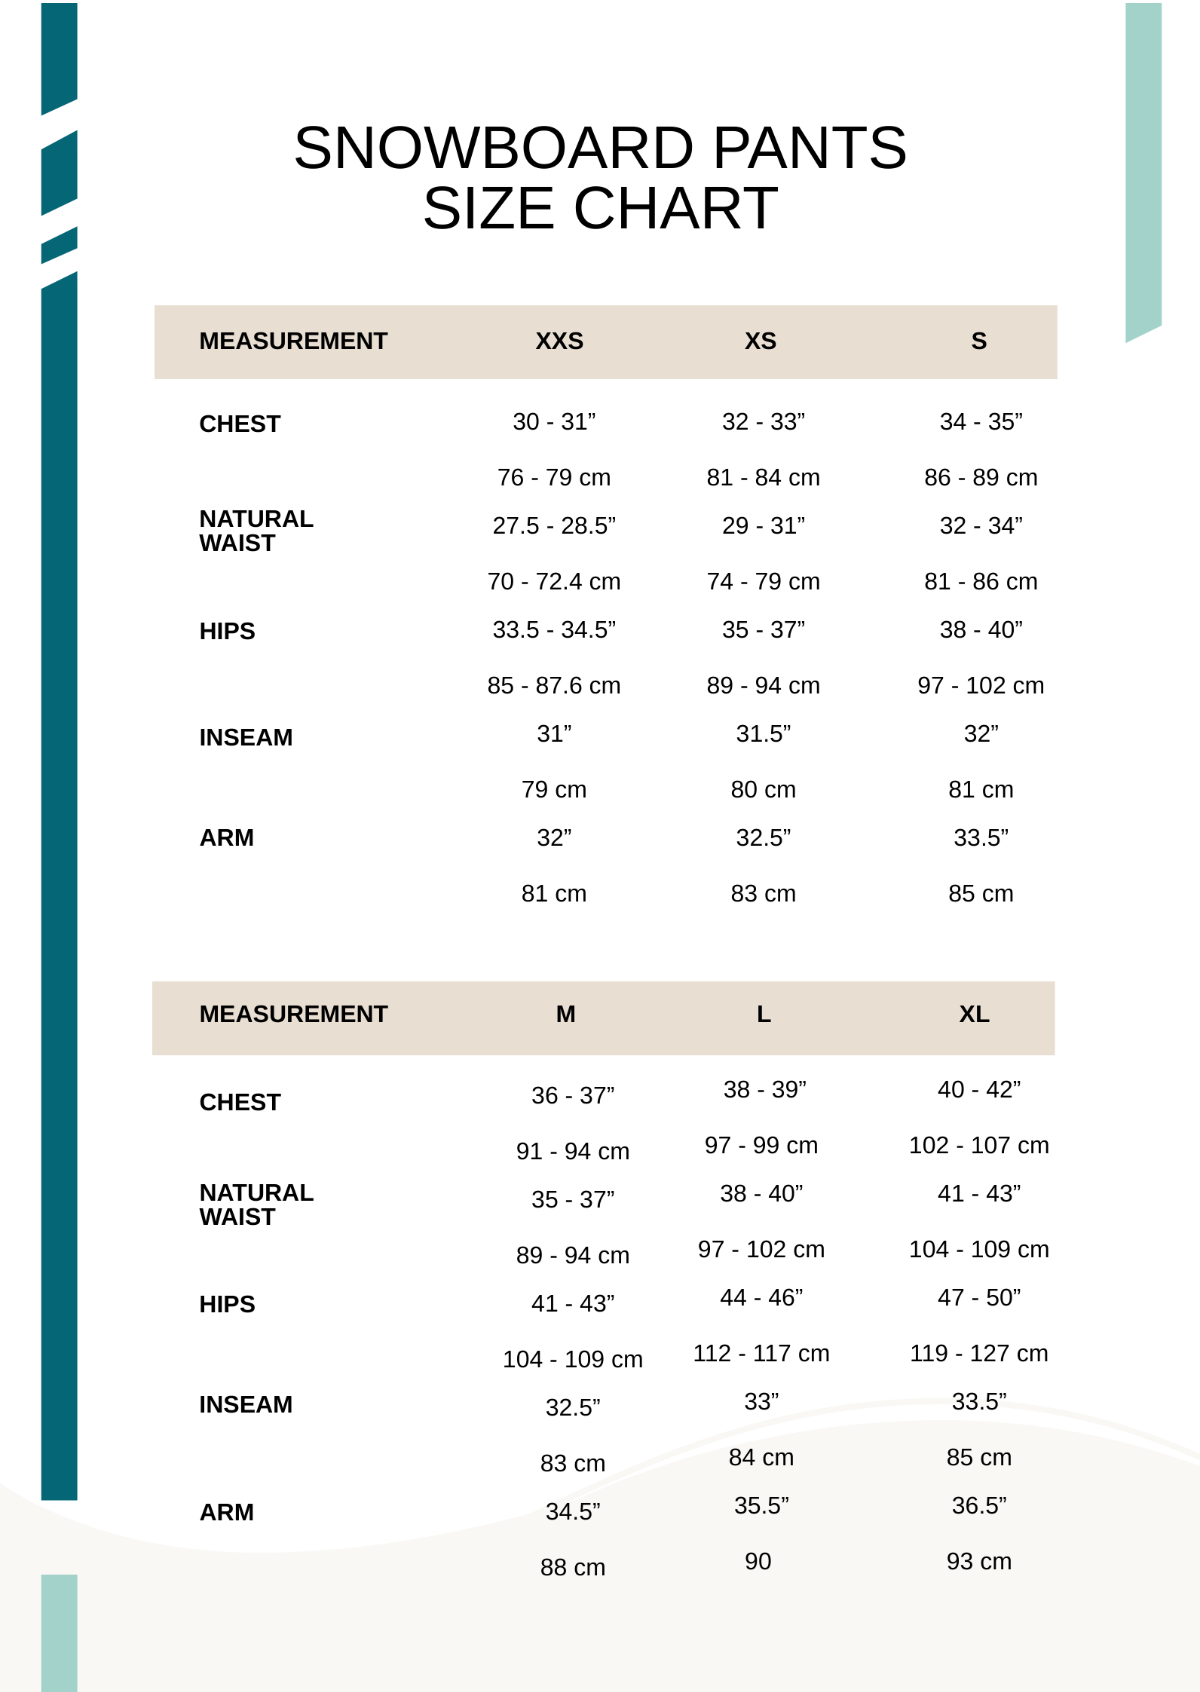 FREE Snowboard Size Chart Template - Download in Word, Google Docs, PDF ...